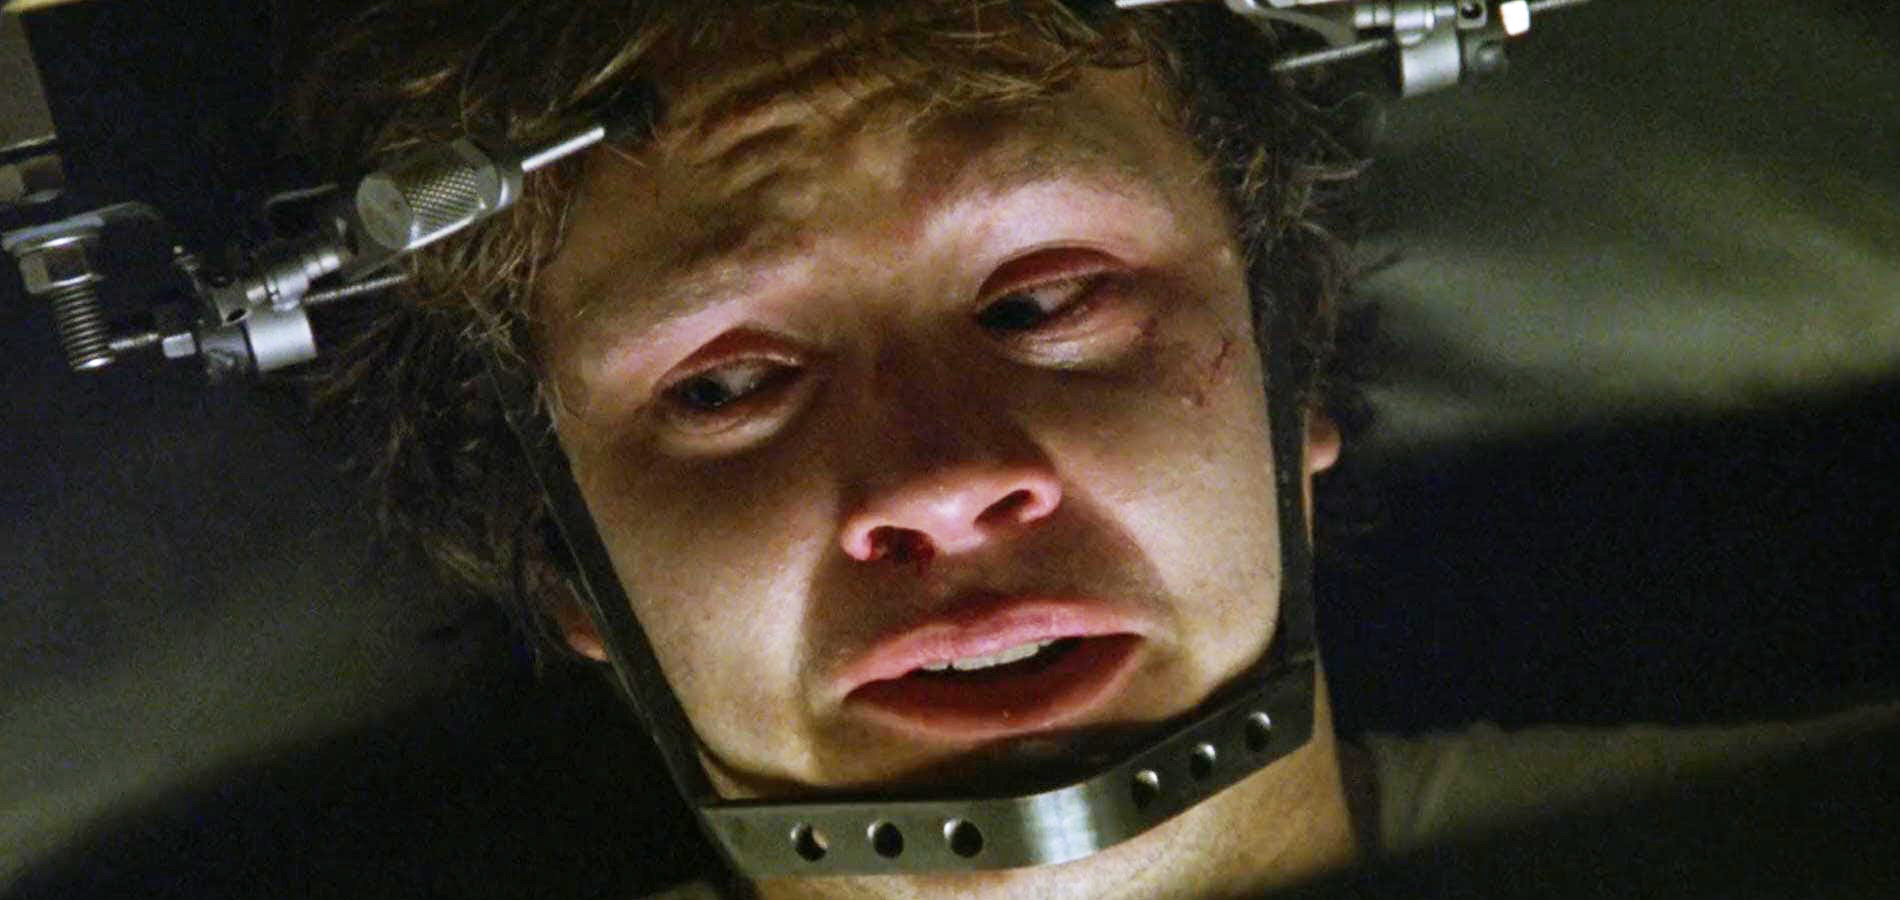 Jacob Singer (Tim Robbins) has a metal contraption attached to his head in Jacob's Ladder